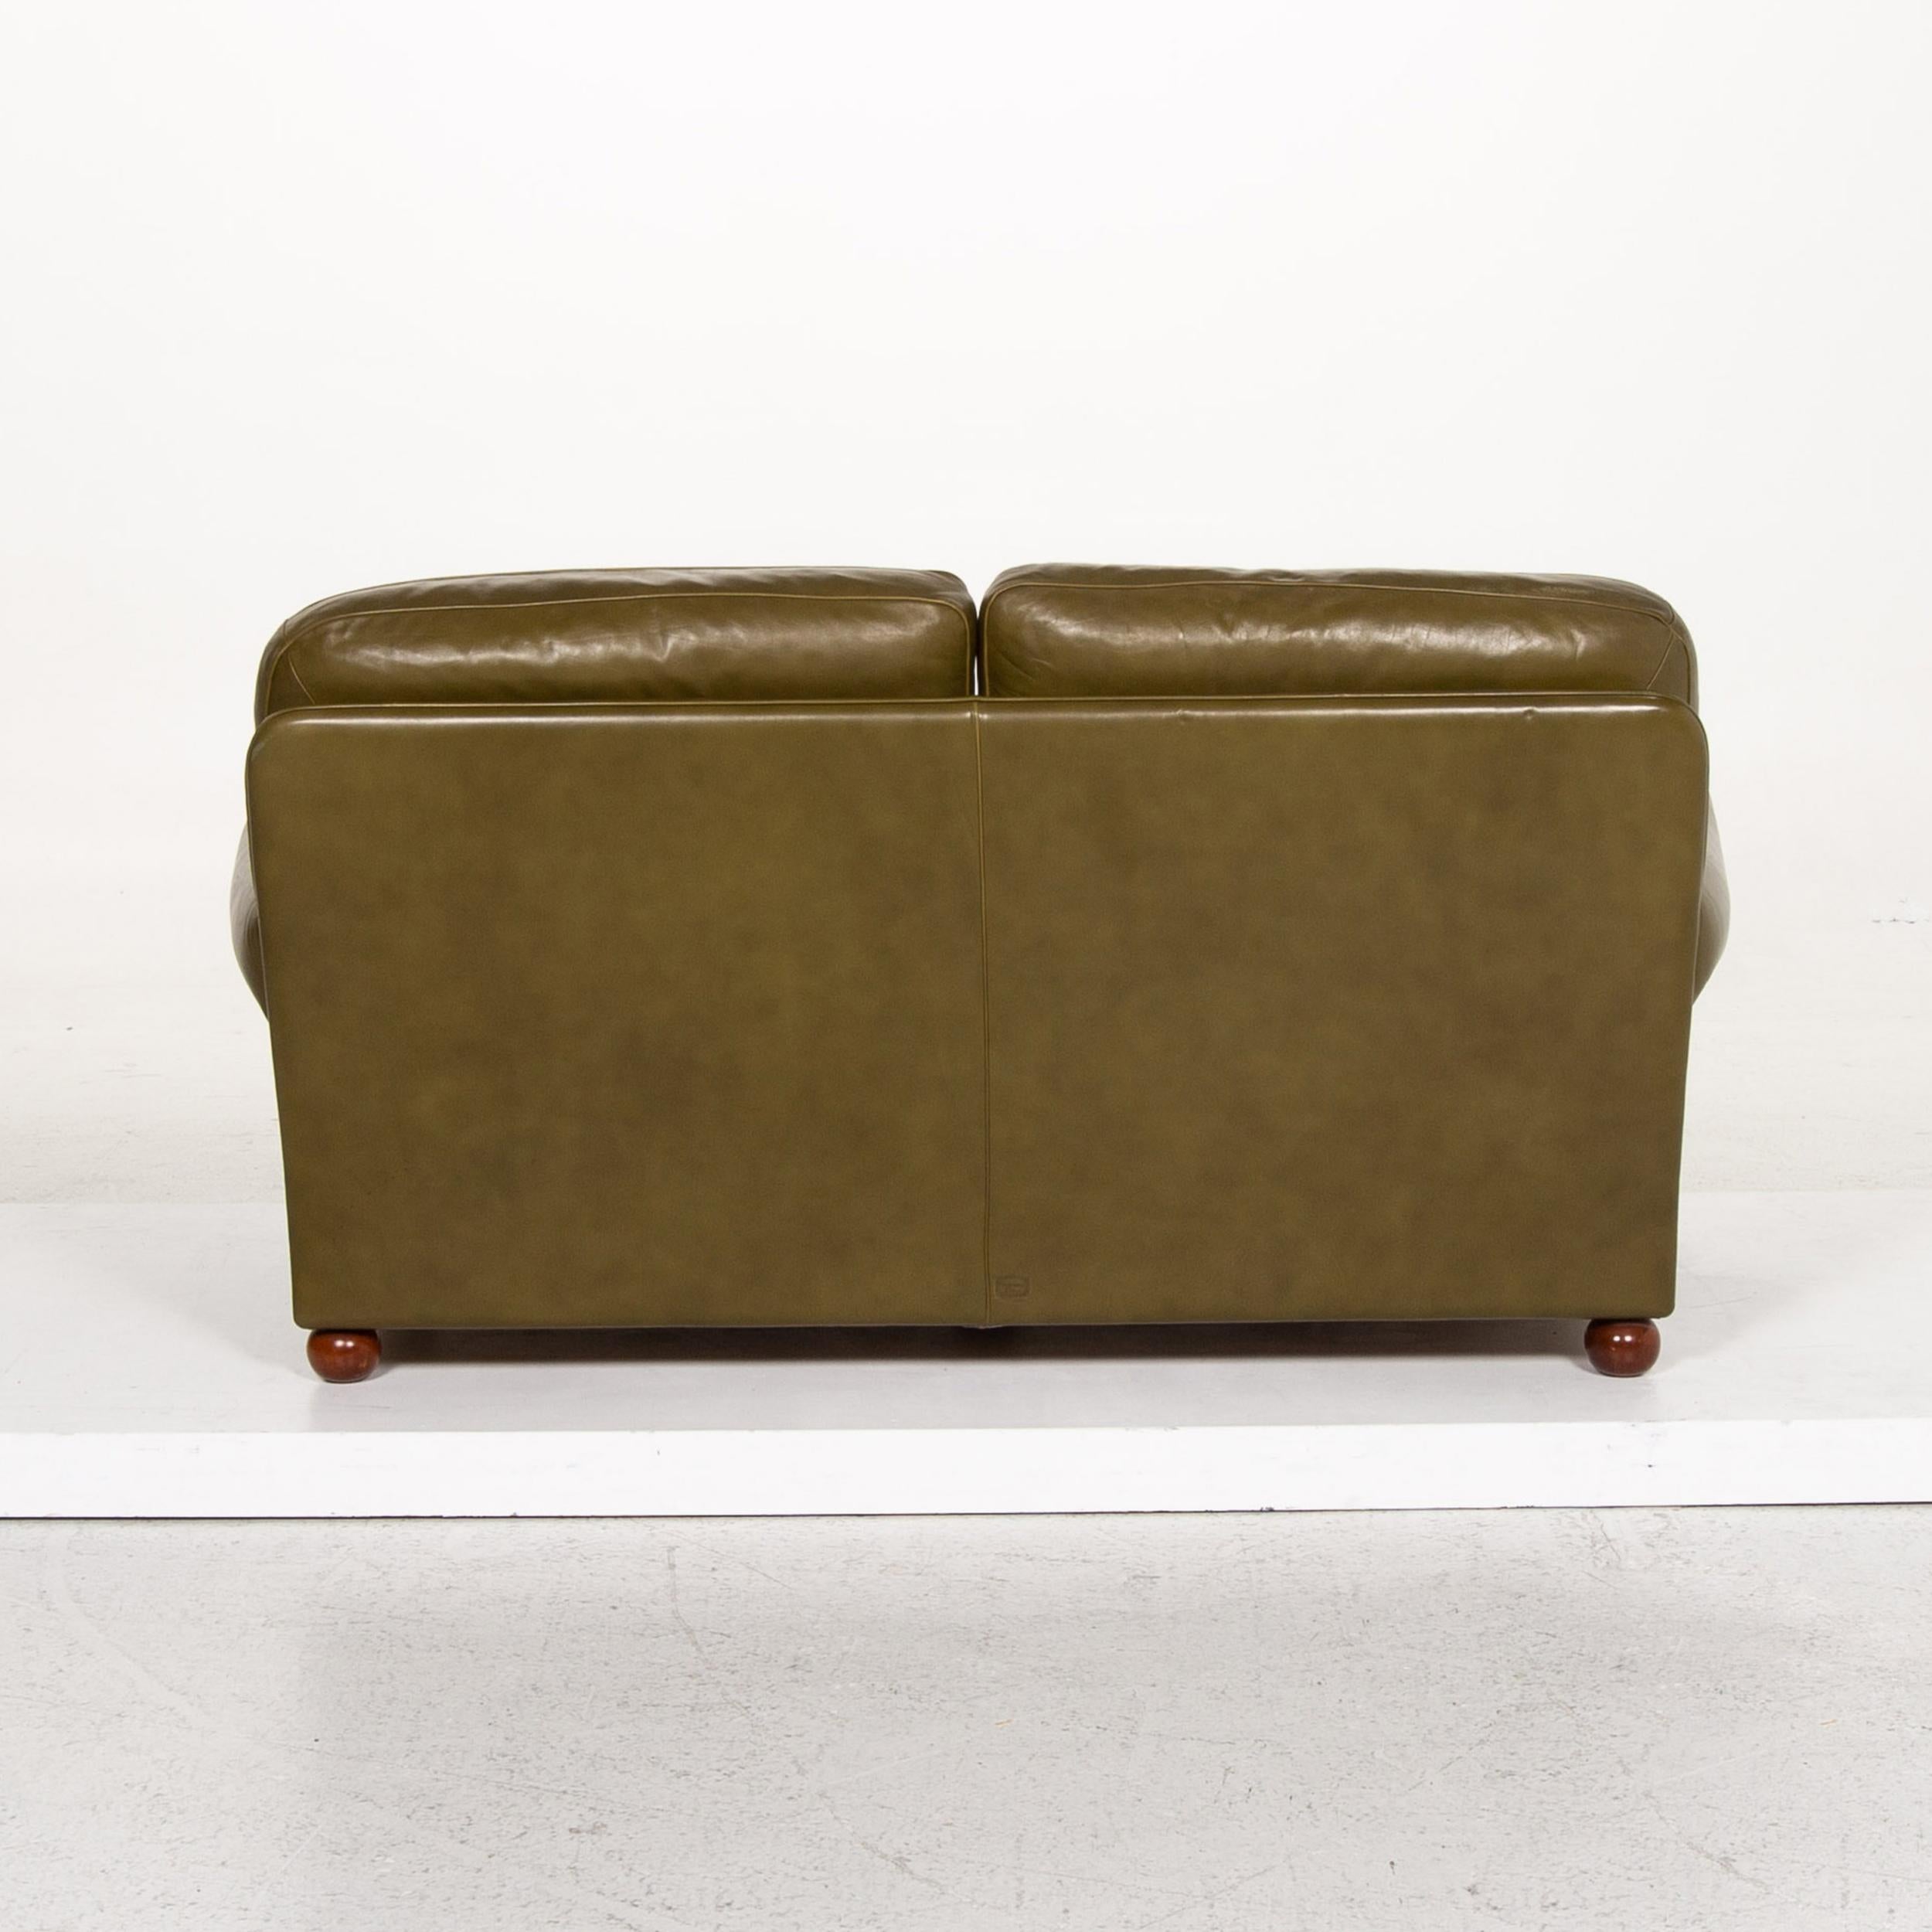 Poltrona Frau Leather Sofa Green Olive Green Two-Seat Couch Retro In Excellent Condition For Sale In Cologne, DE